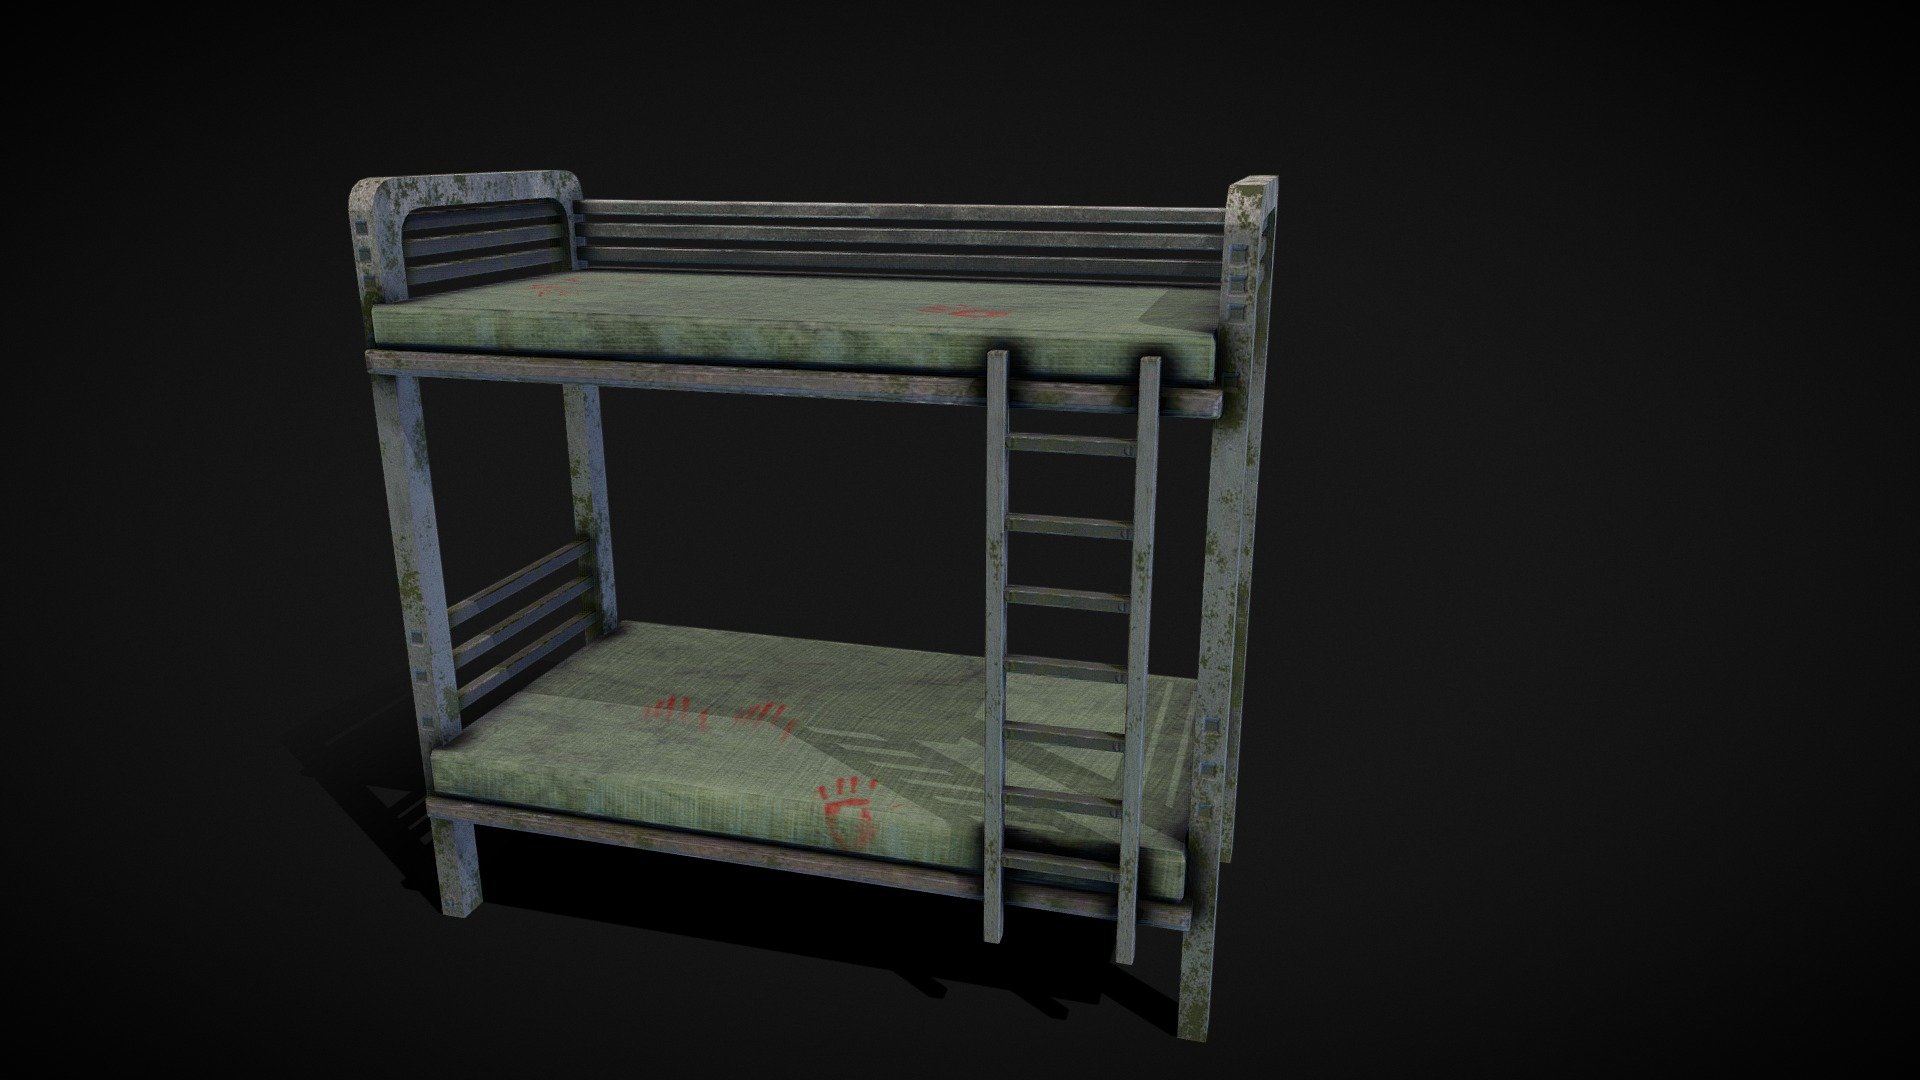 Another Asset with 1 Set of textures 3d model